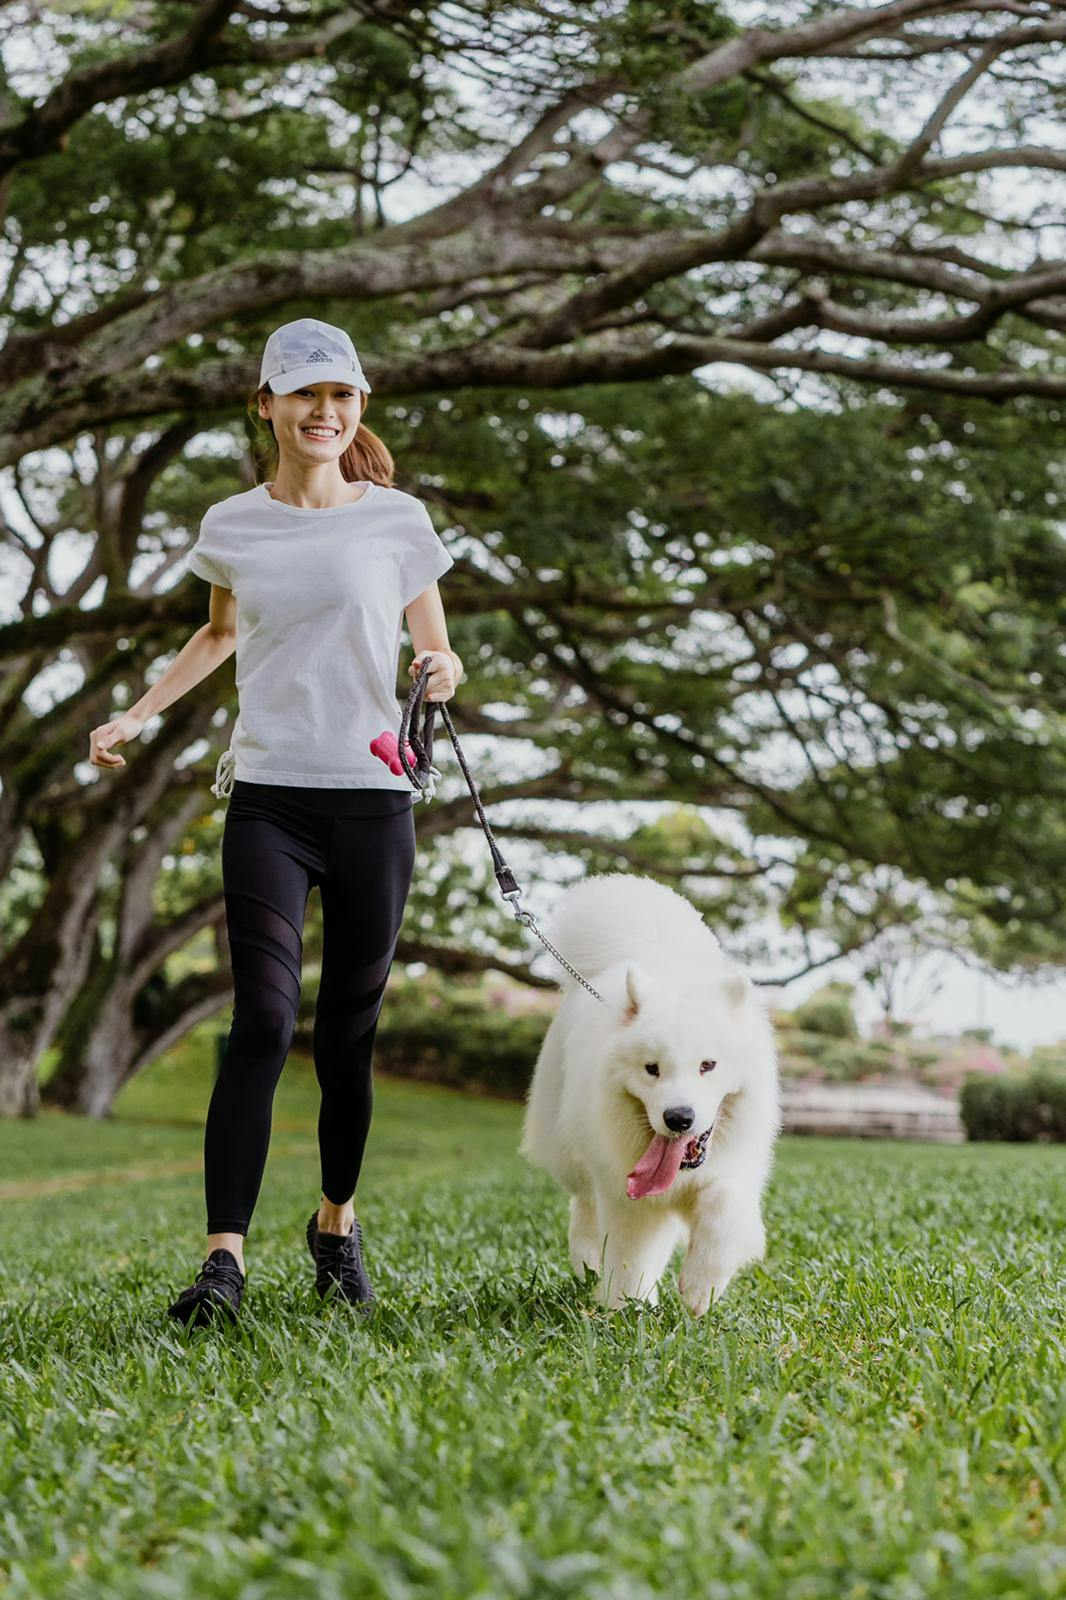 You can now raise money for charities by dog walking!